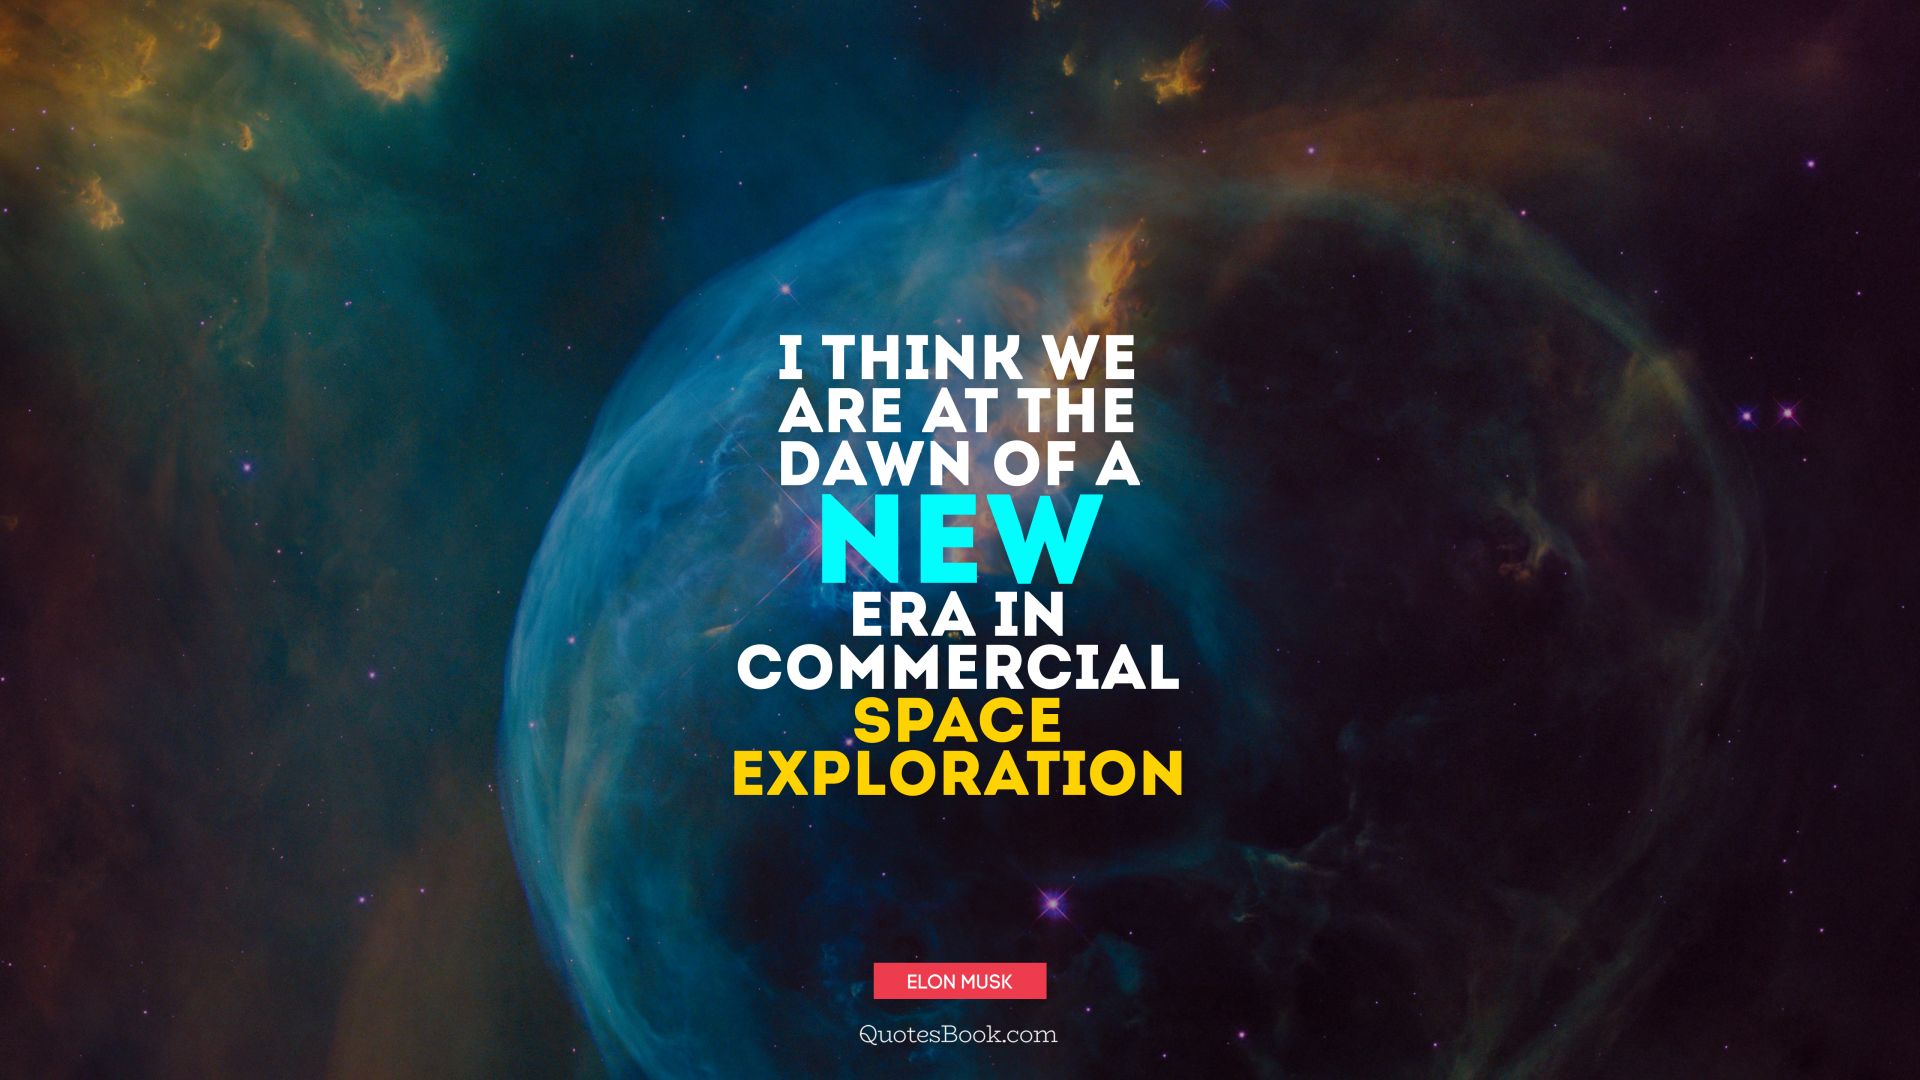 I think we are at the dawn of a new era in commercial space exploration. - Quote by Elon Musk